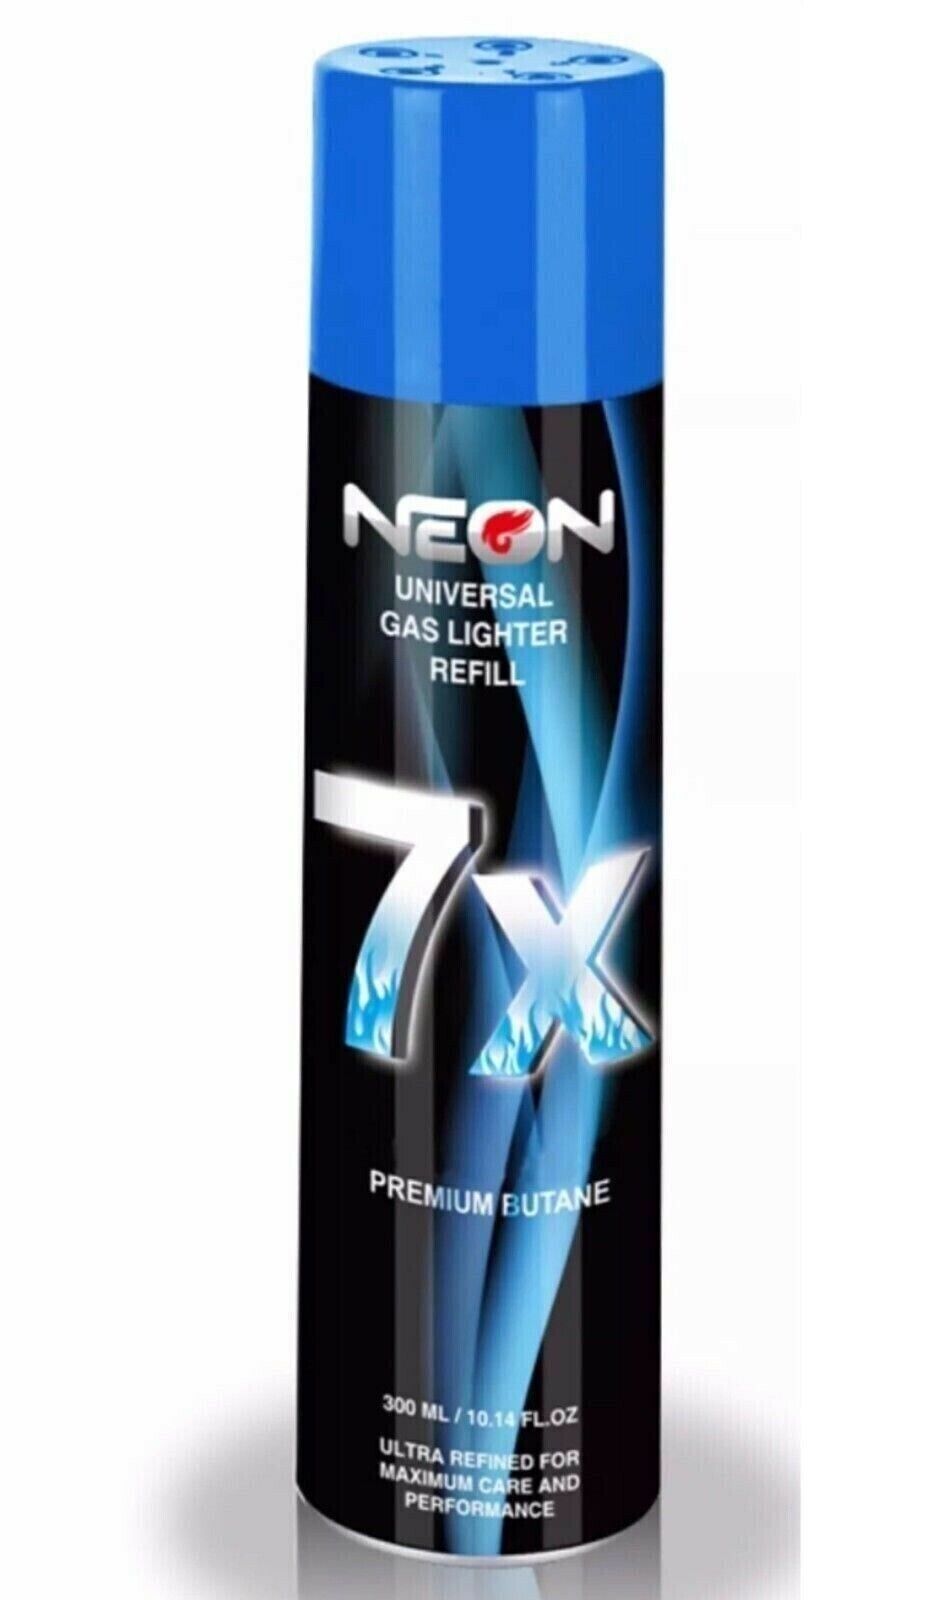 1 Can Neon 7X Refined Butane Lighter Gas Fuel Refill 300 mL 10.14 oZ Canister